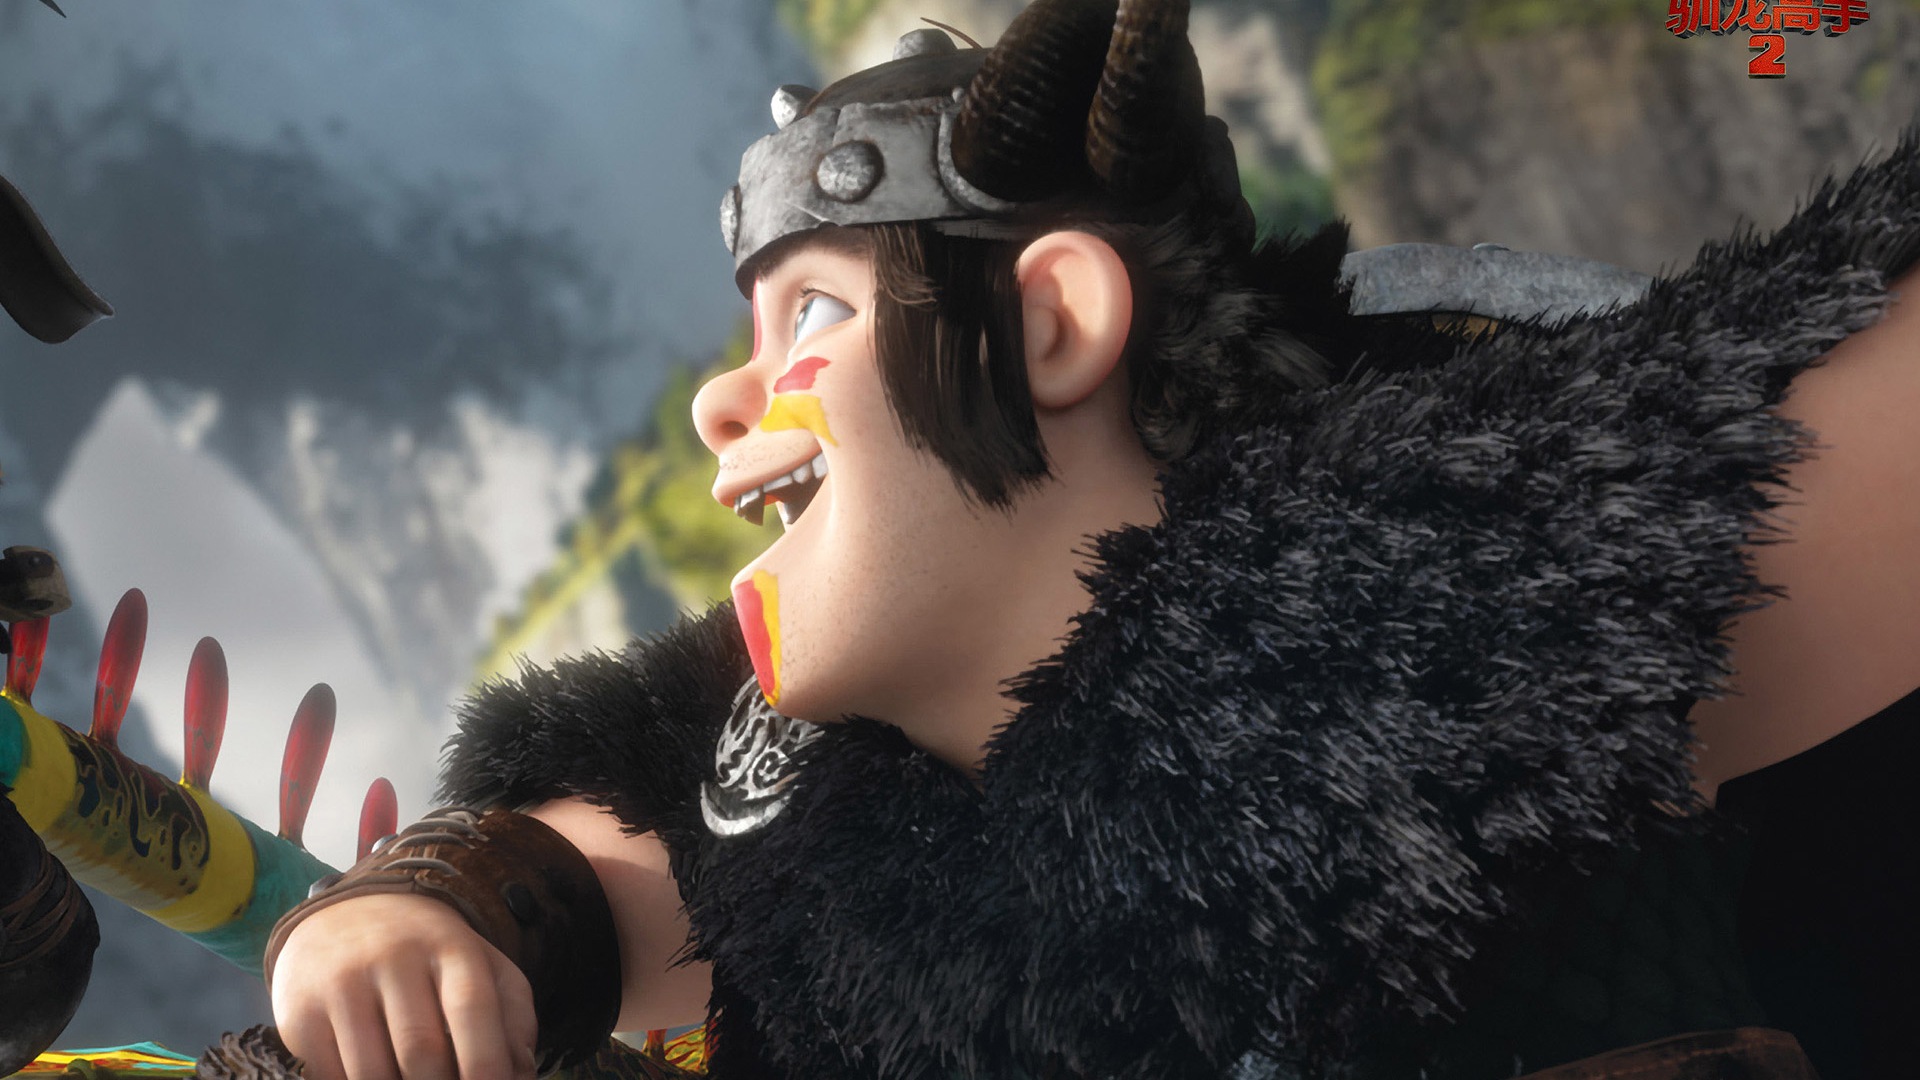 How to Train Your Dragon 2 驯龙高手2 高清壁纸4 - 1920x1080